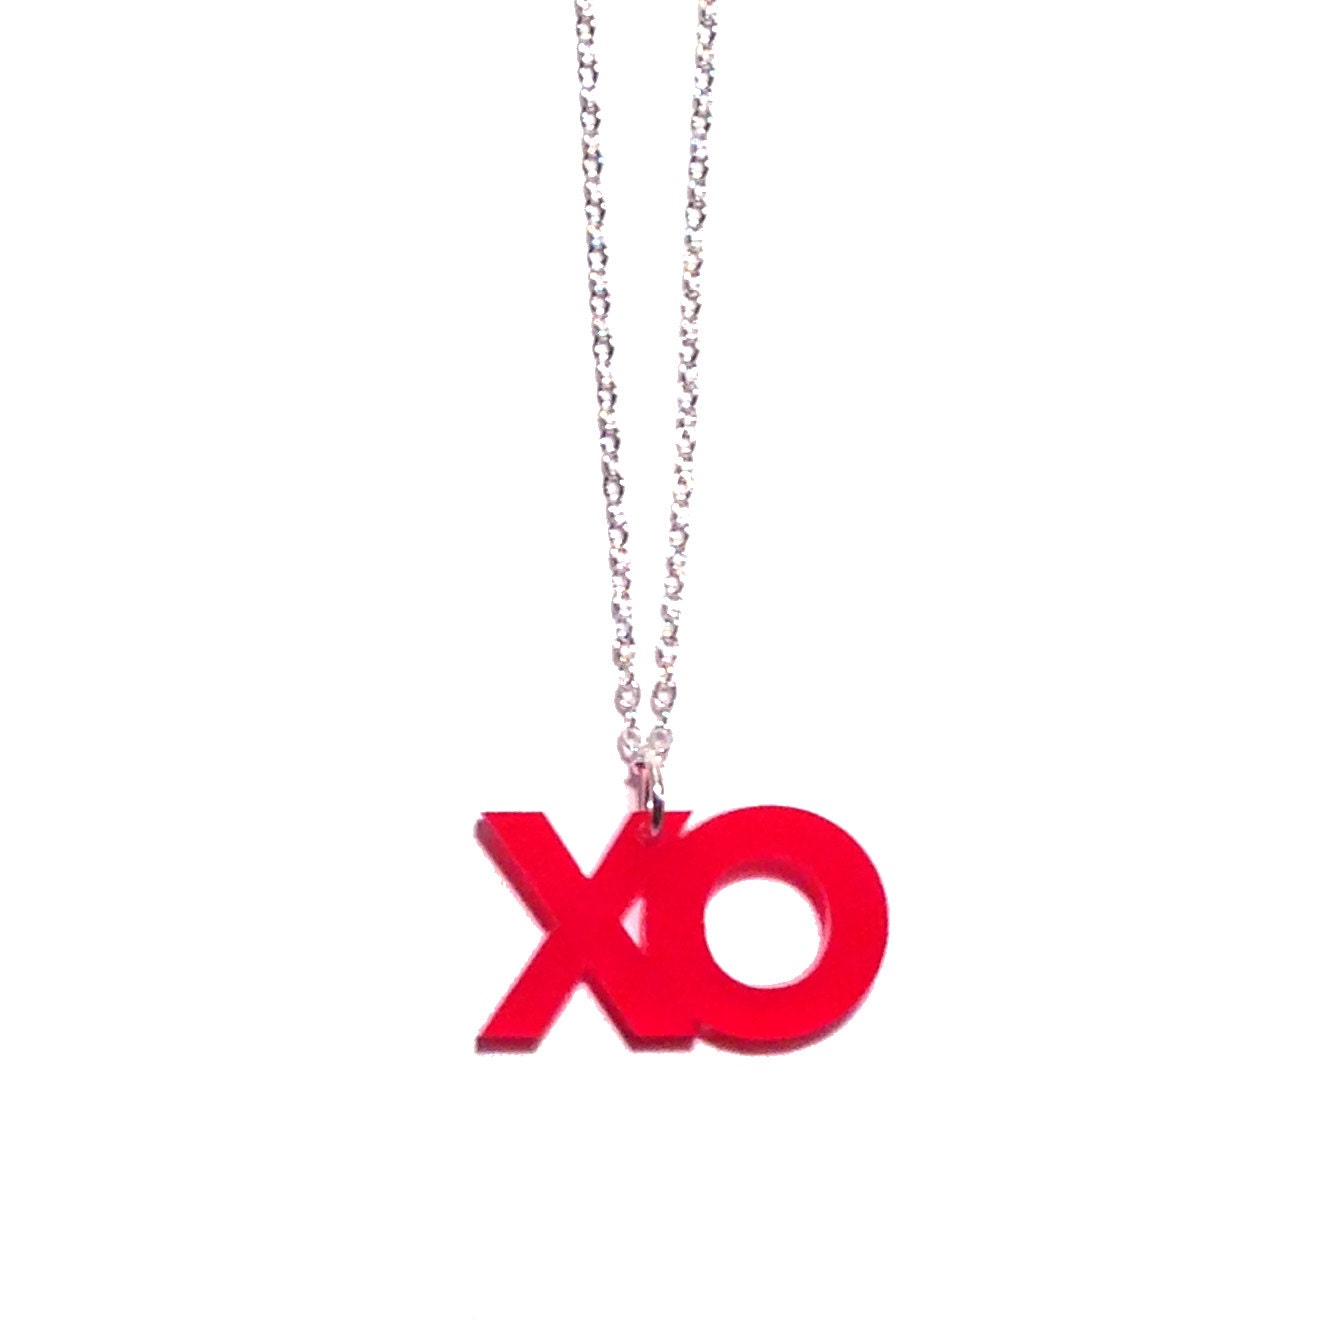 xo hugs and kisses necklace (red) - plastique